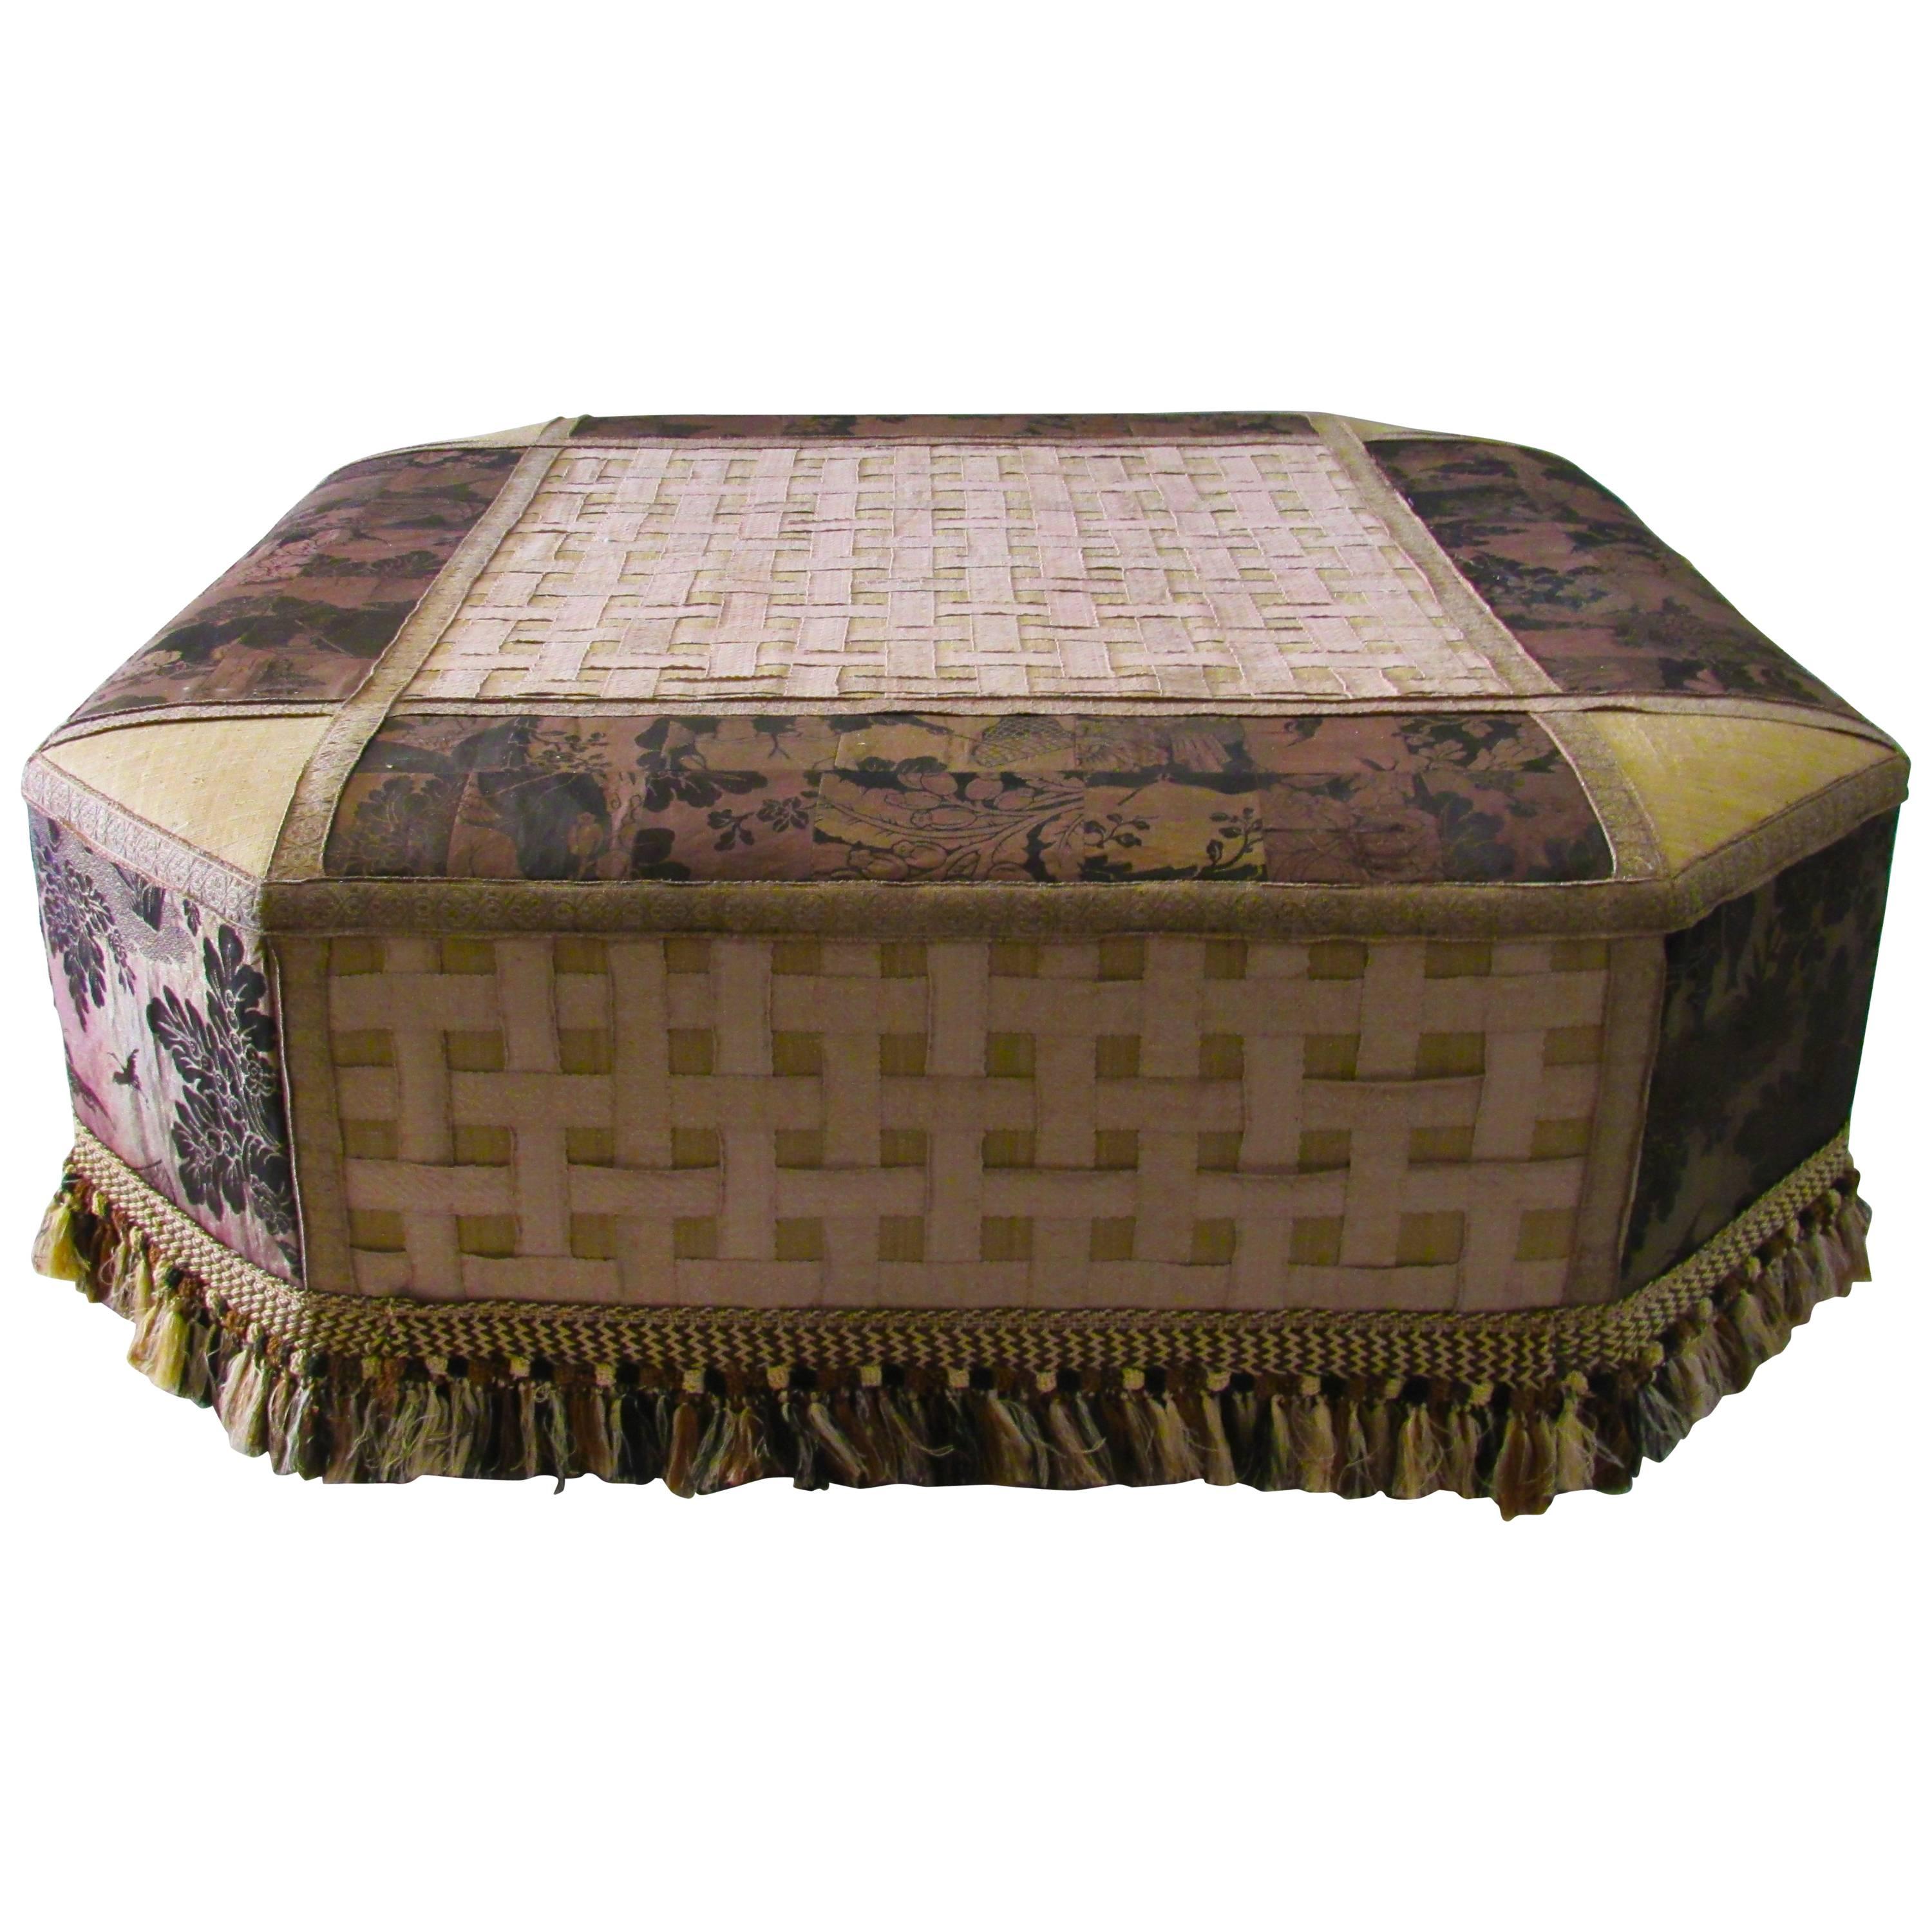 Sophisticated Peter Marino Ottoman with Antique Upholstery